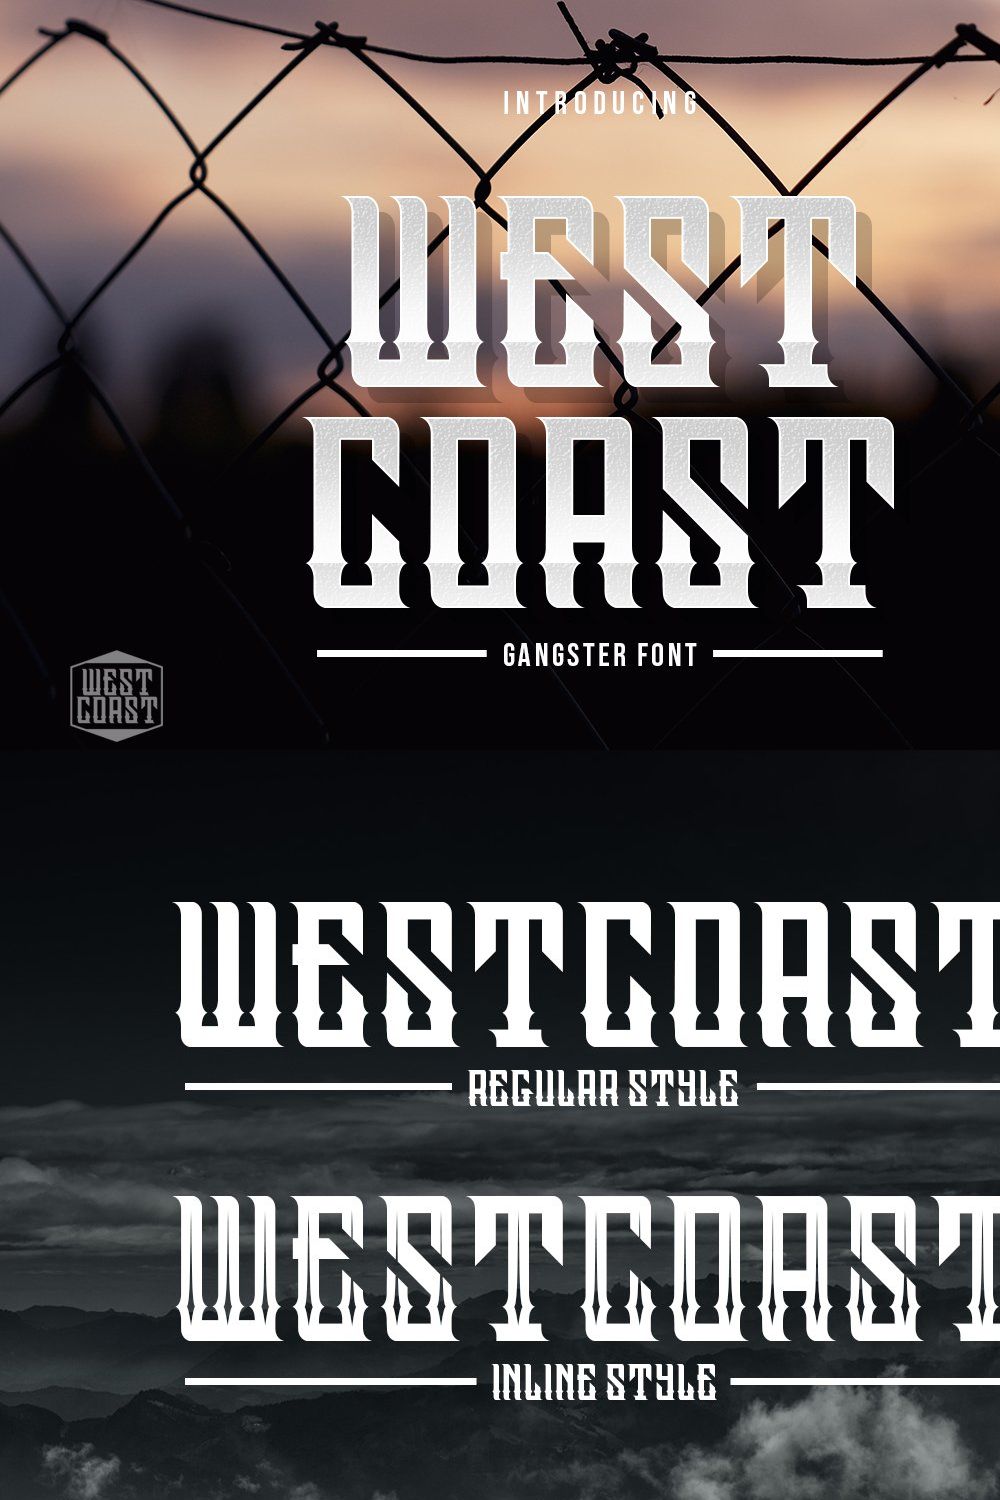 Westcoast pinterest preview image.